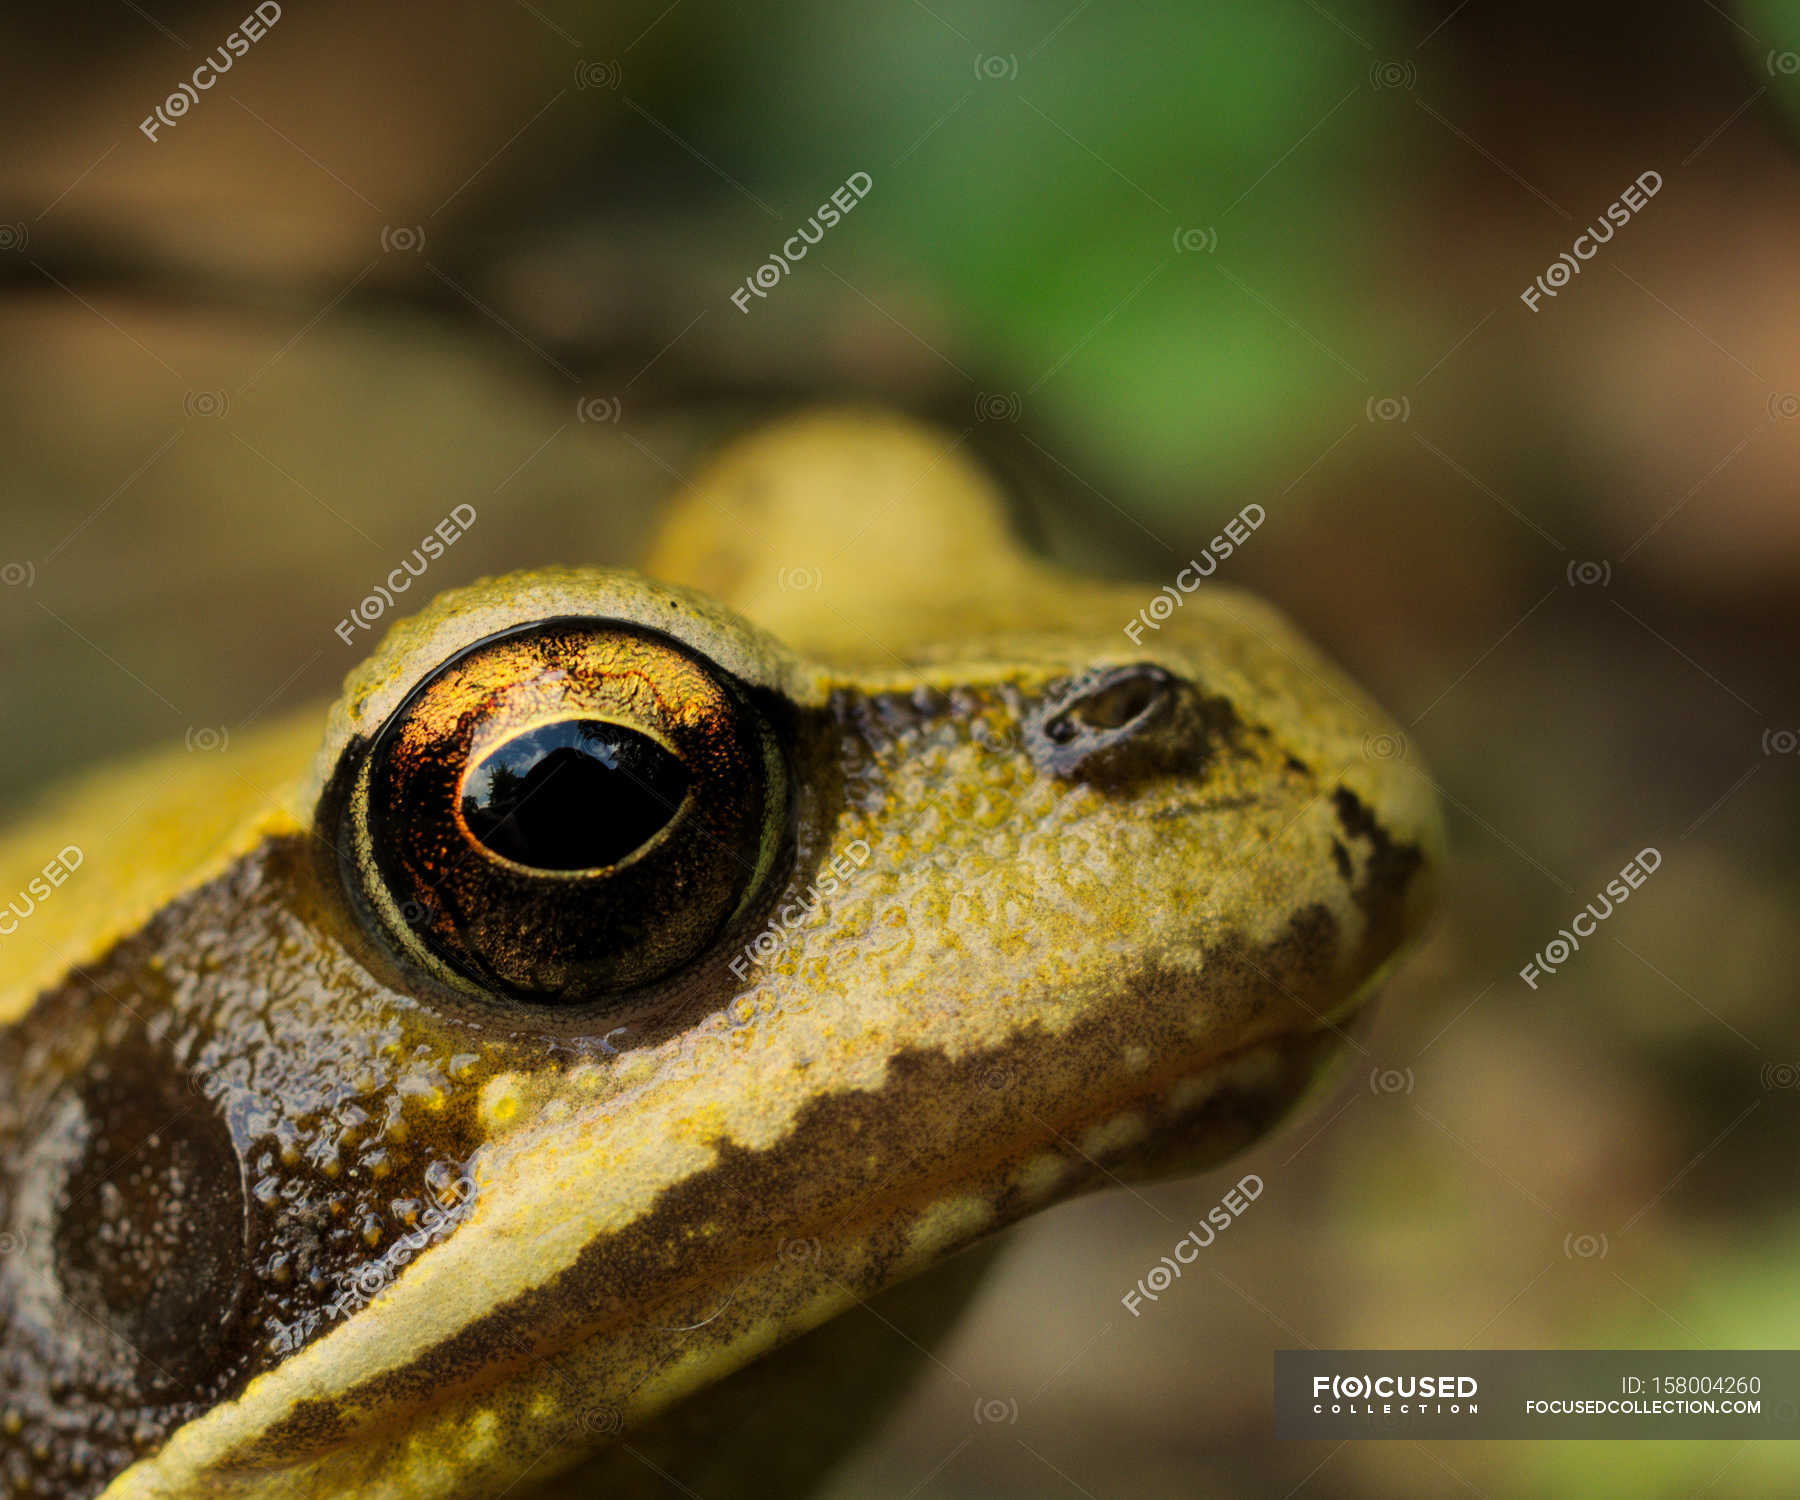 Frog in wild nature — Stock Photo | #158004260